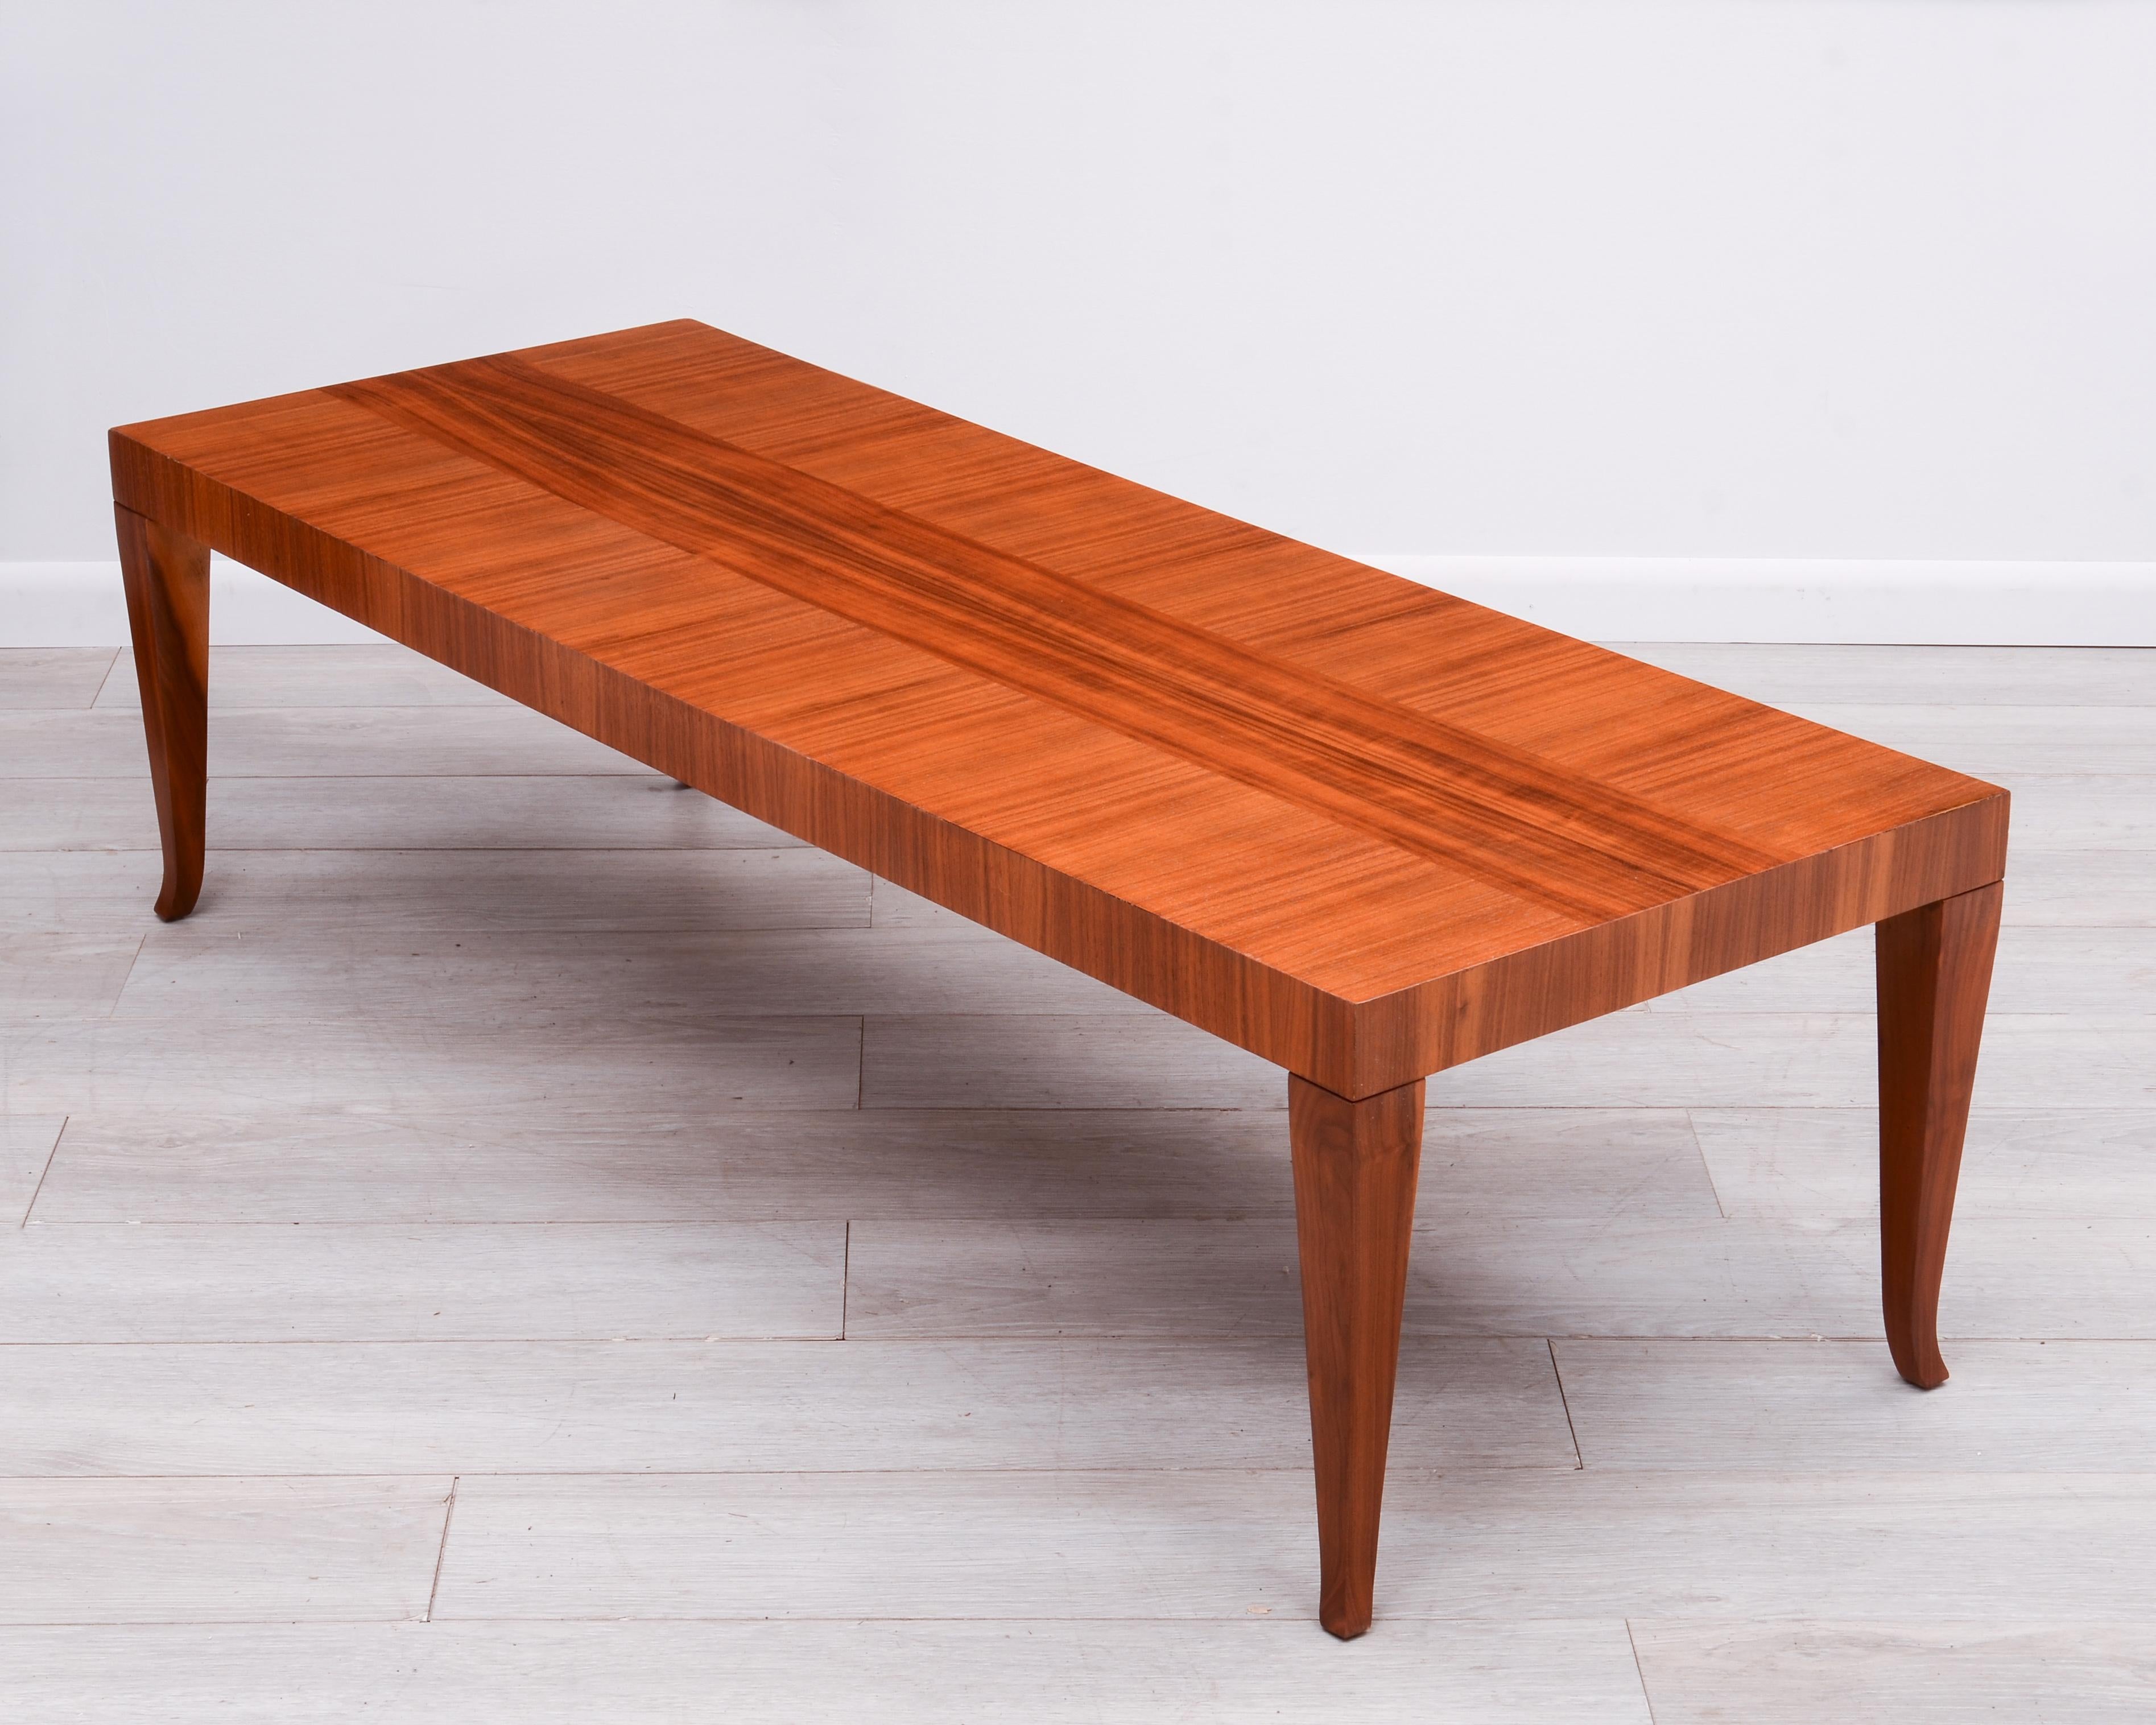 A saber leg coffee table designed by T.H. Robsjohn-Gibbings for Widdicomb and made in 1957. The table top features contrasting bands of book matched walnut. Like all T.H. Robsjohn-Gibbings designs the table is incredibly well made with attention to